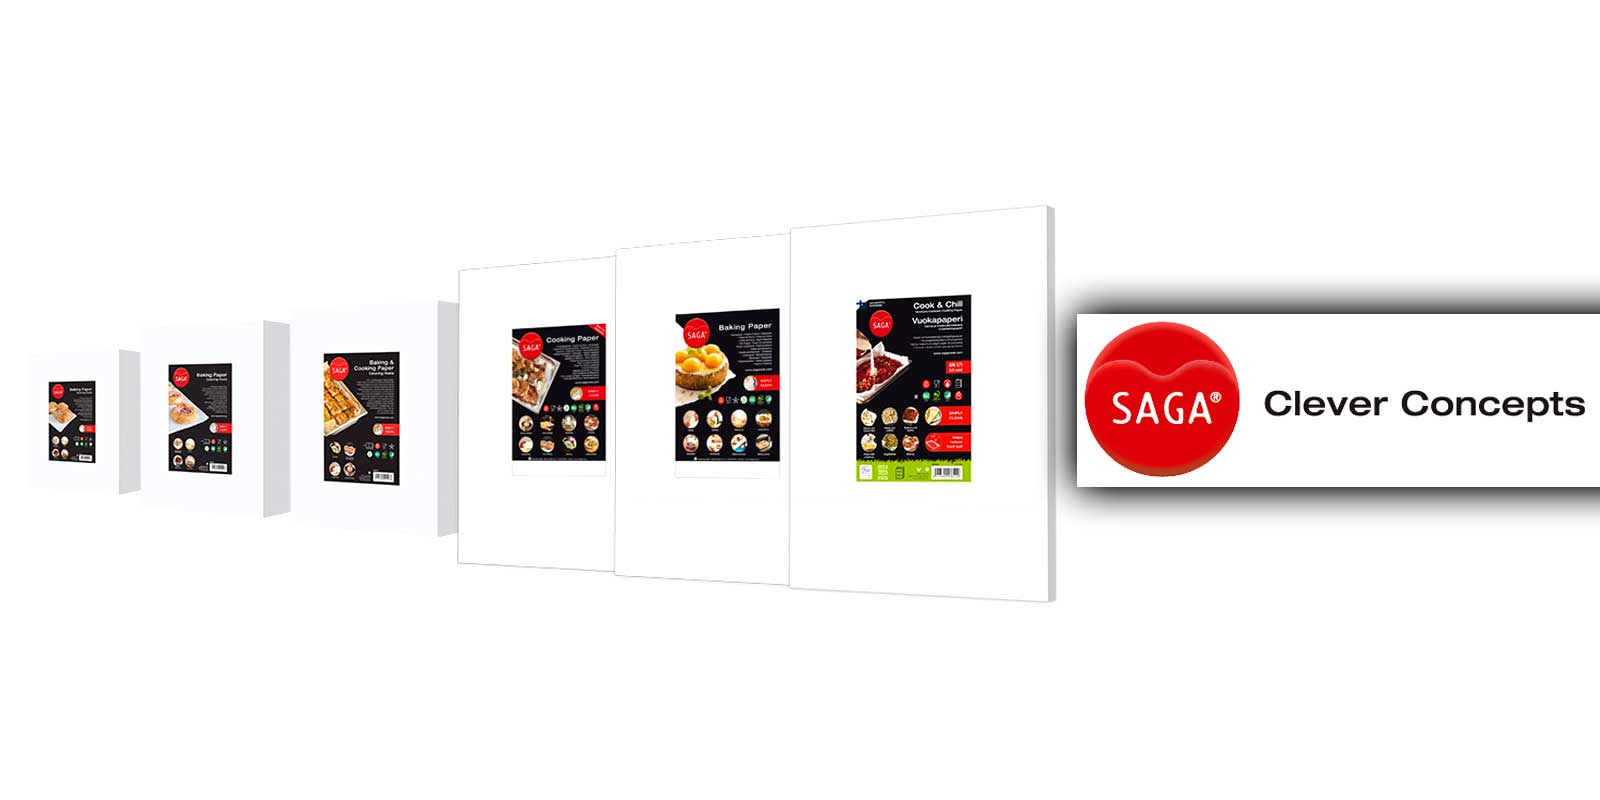 Saga products, cooking parchment, baking paper and foil SAGA Kochpergament stands for all the nice little things that we experience while preparing and enjoying a good meal. Our offering includes inspiring multi-purpose products for people who want to make tastier and healthier foods more creatively, easily and affordably than ever before.